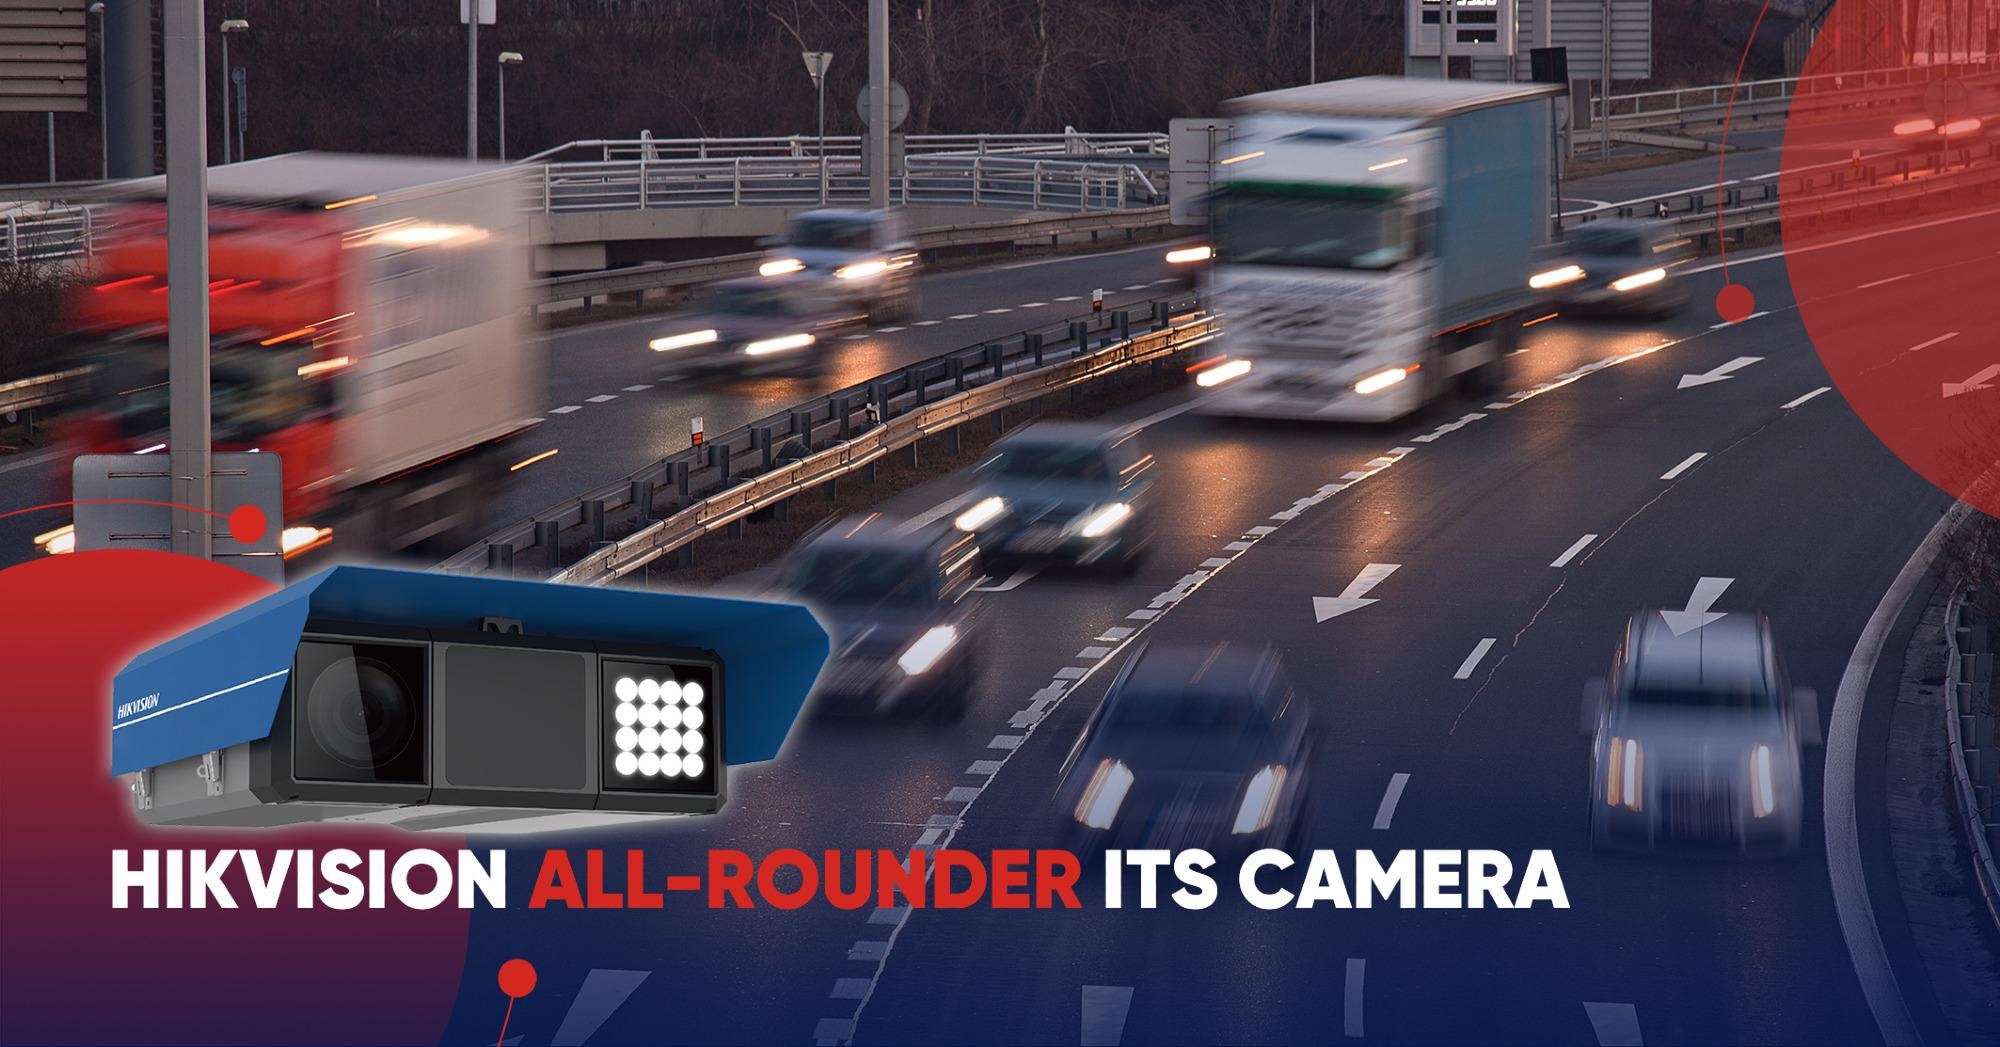 Hikvision Launches New ITS Camera for Improvement of Road Safety and Traffic Flow